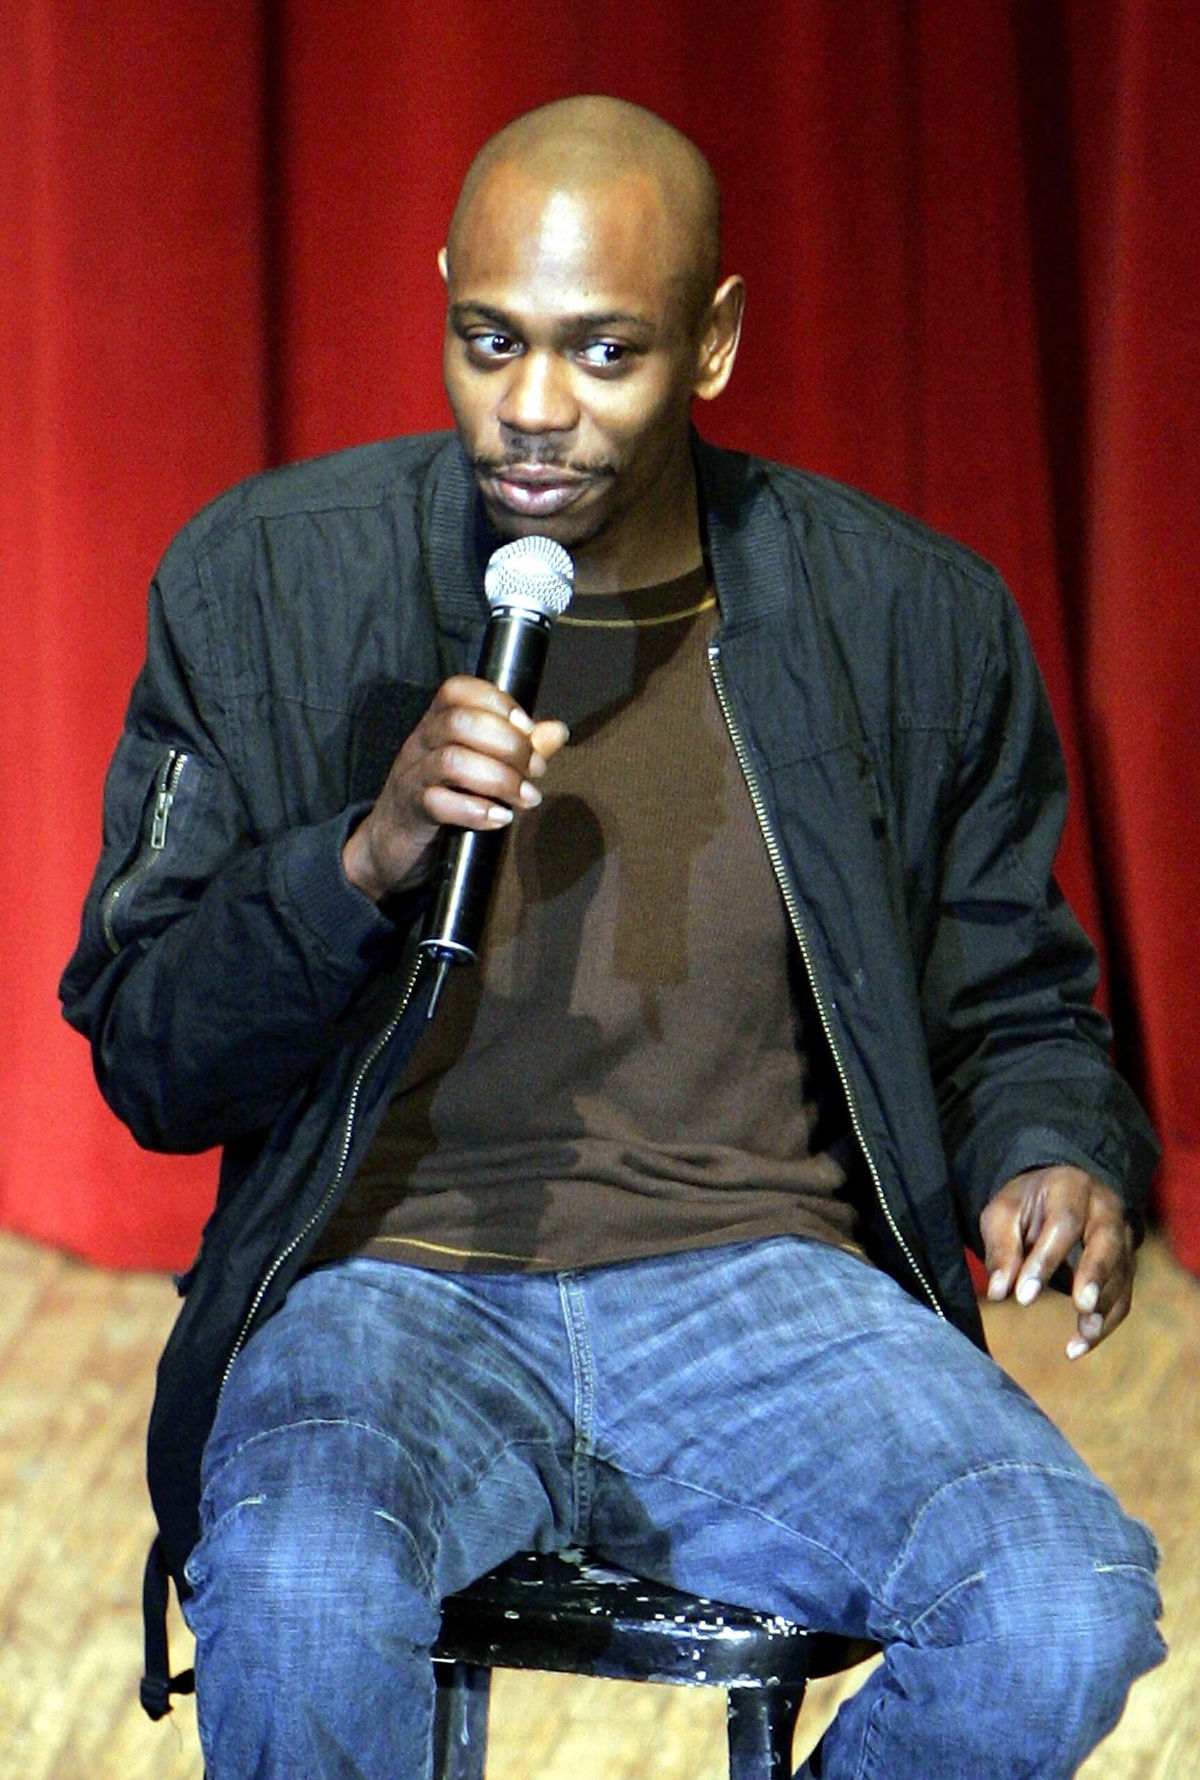 <i>Joshua Roberts/Getty Images</i><br/>Comedian Dave Chappelle has drawn backlash for some of his comments in his latest Netflix comedy special